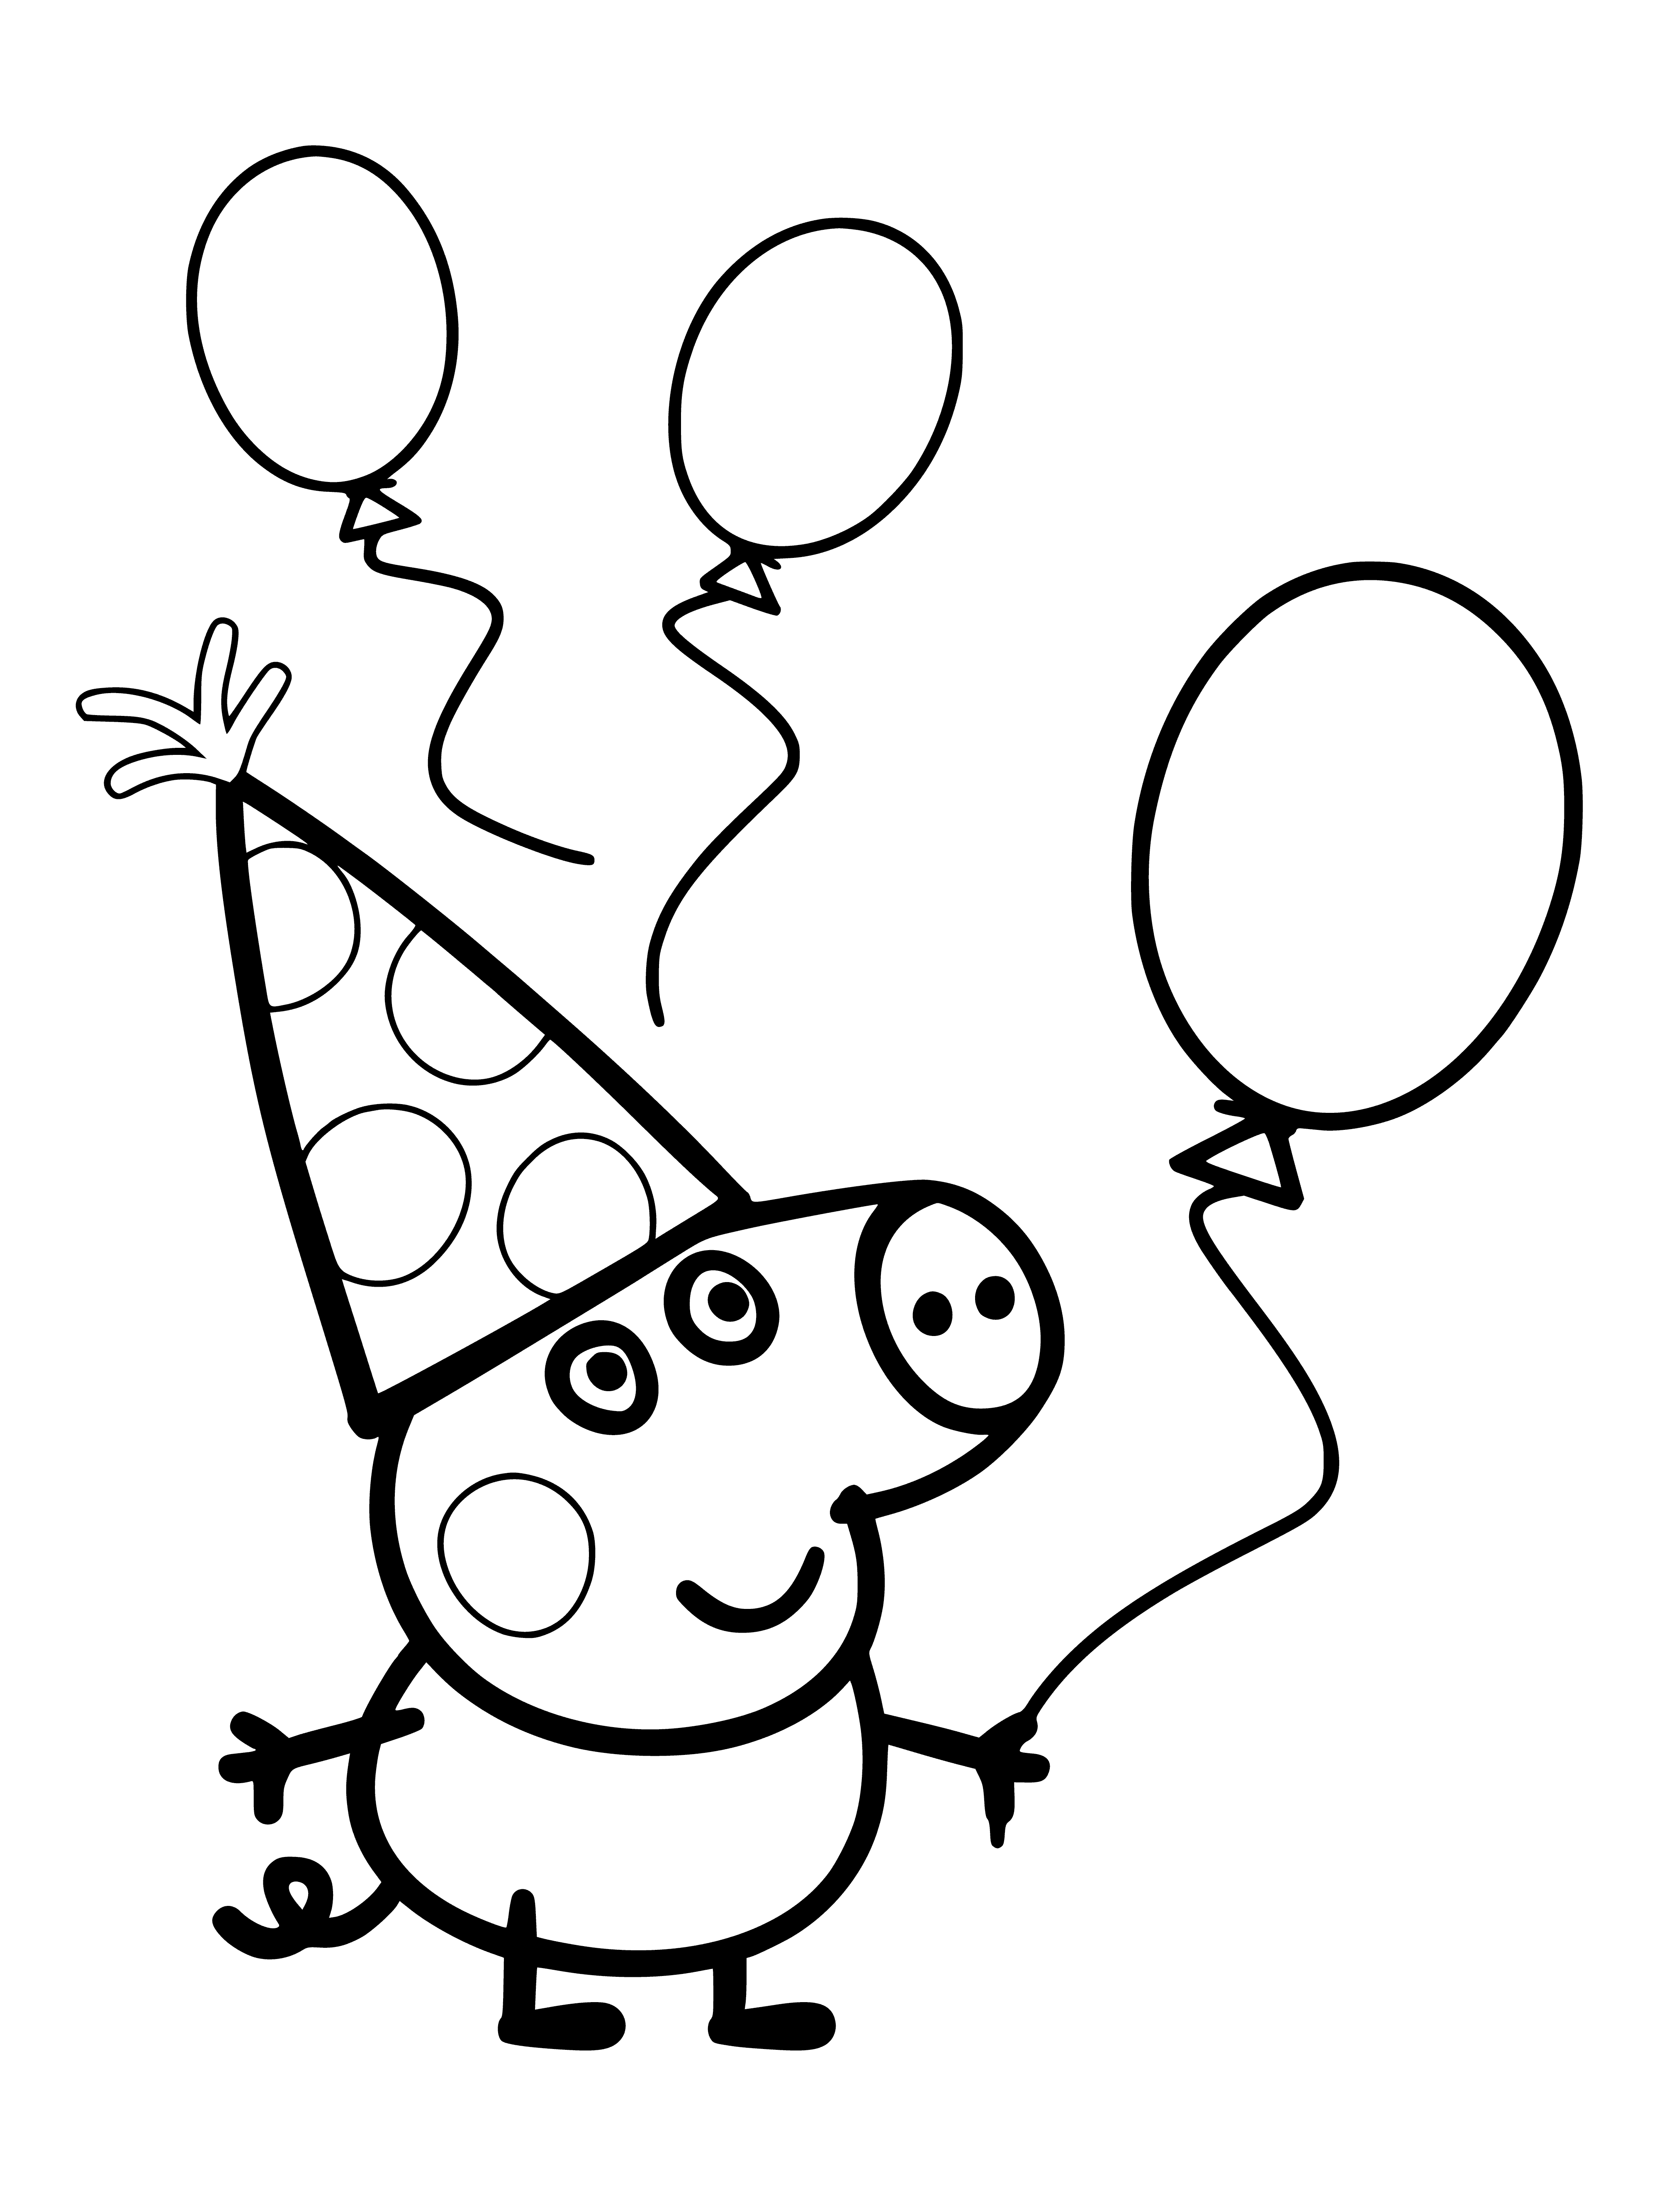 coloring page: George is having a great time dancing and looking happy at a party with his friends.